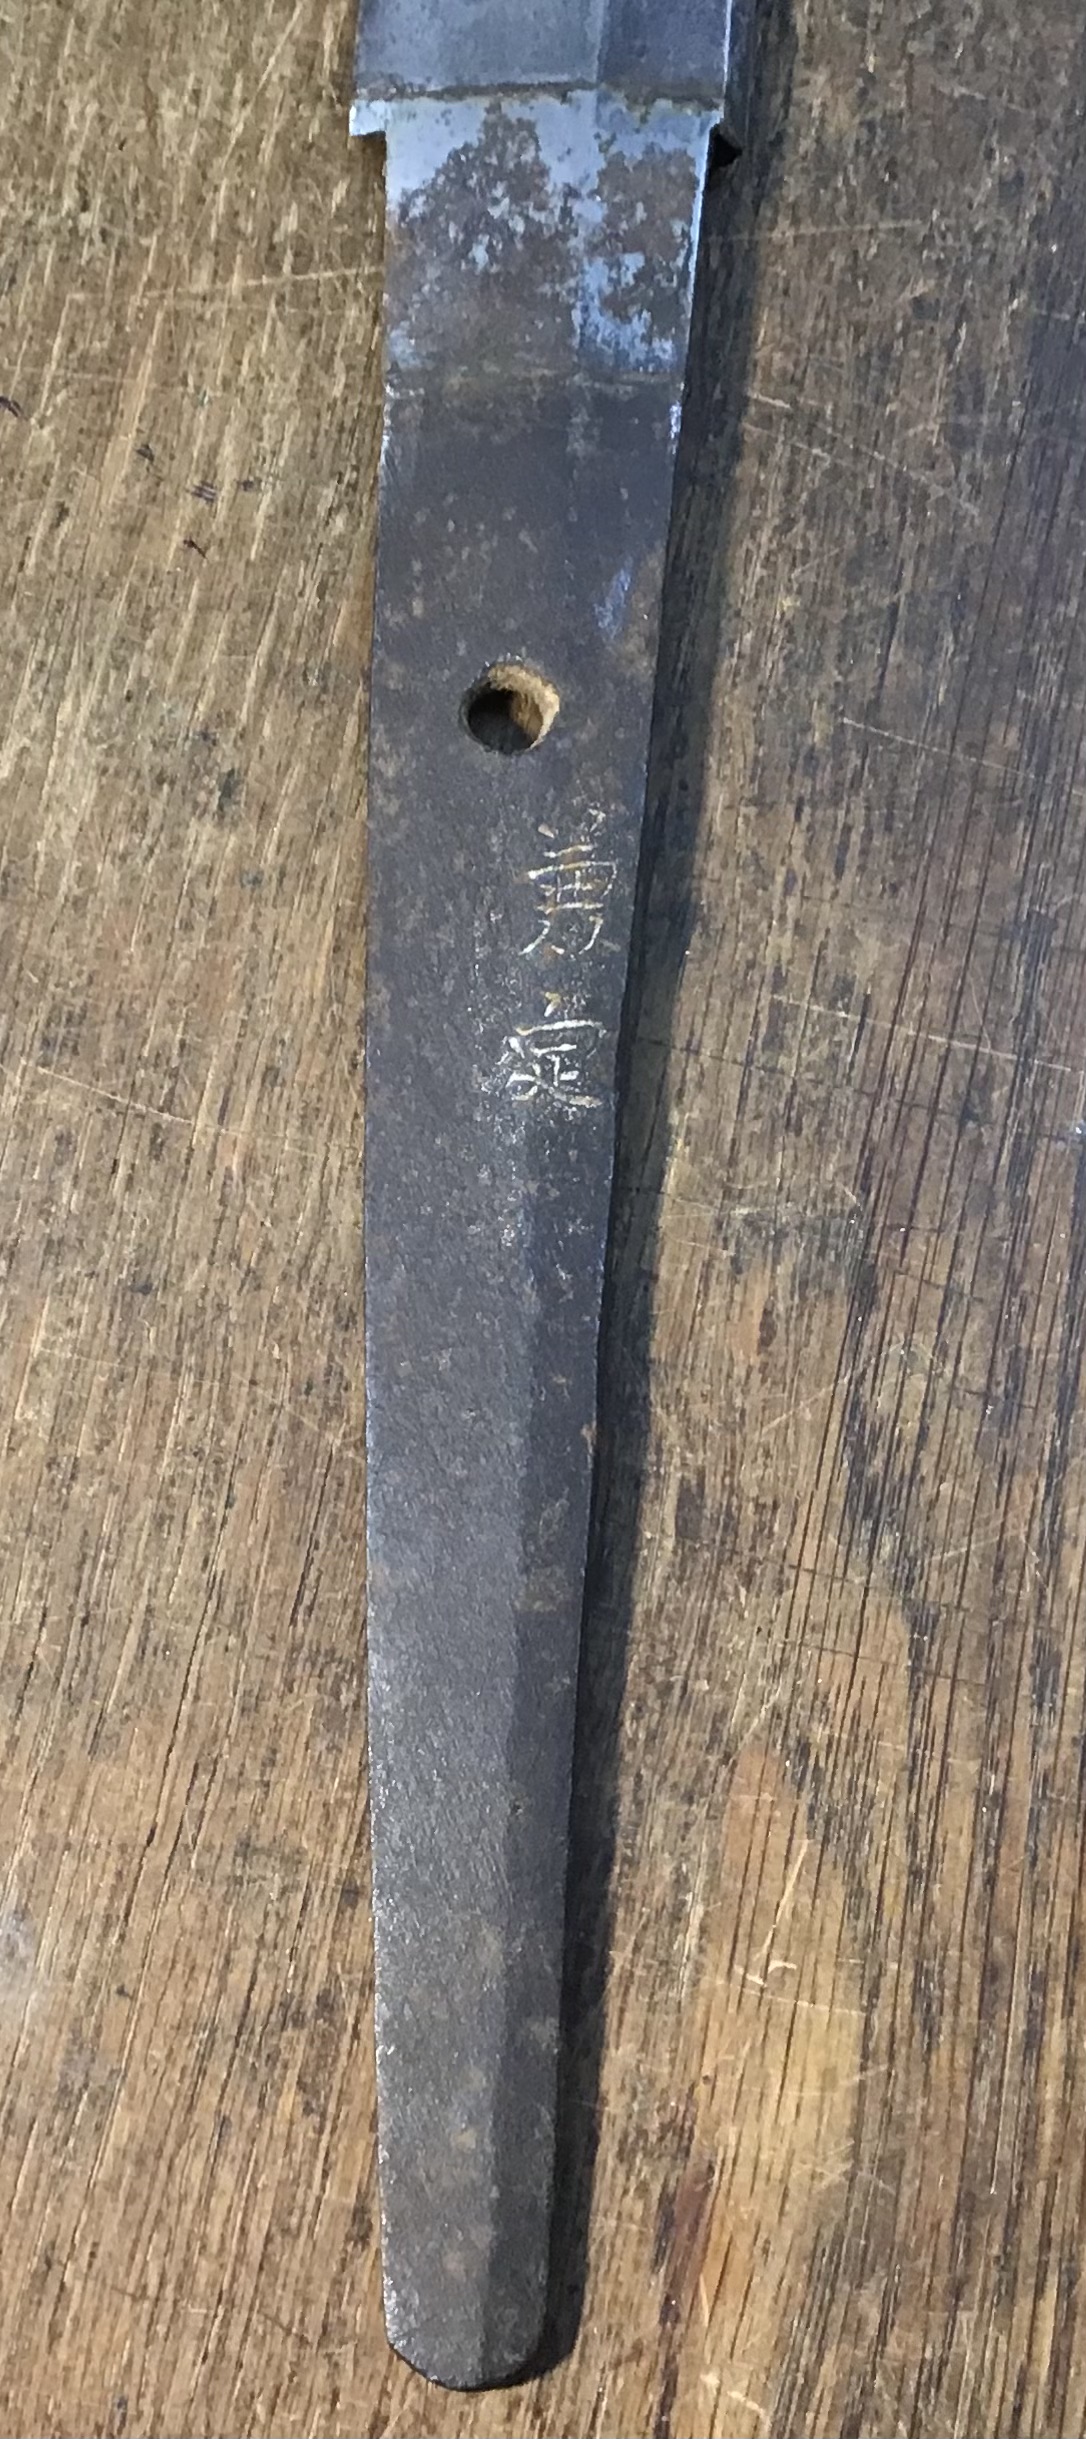 19th Century Japanese Katana Sword (blade could be older), Signature to tang, black lacquered - Image 4 of 21